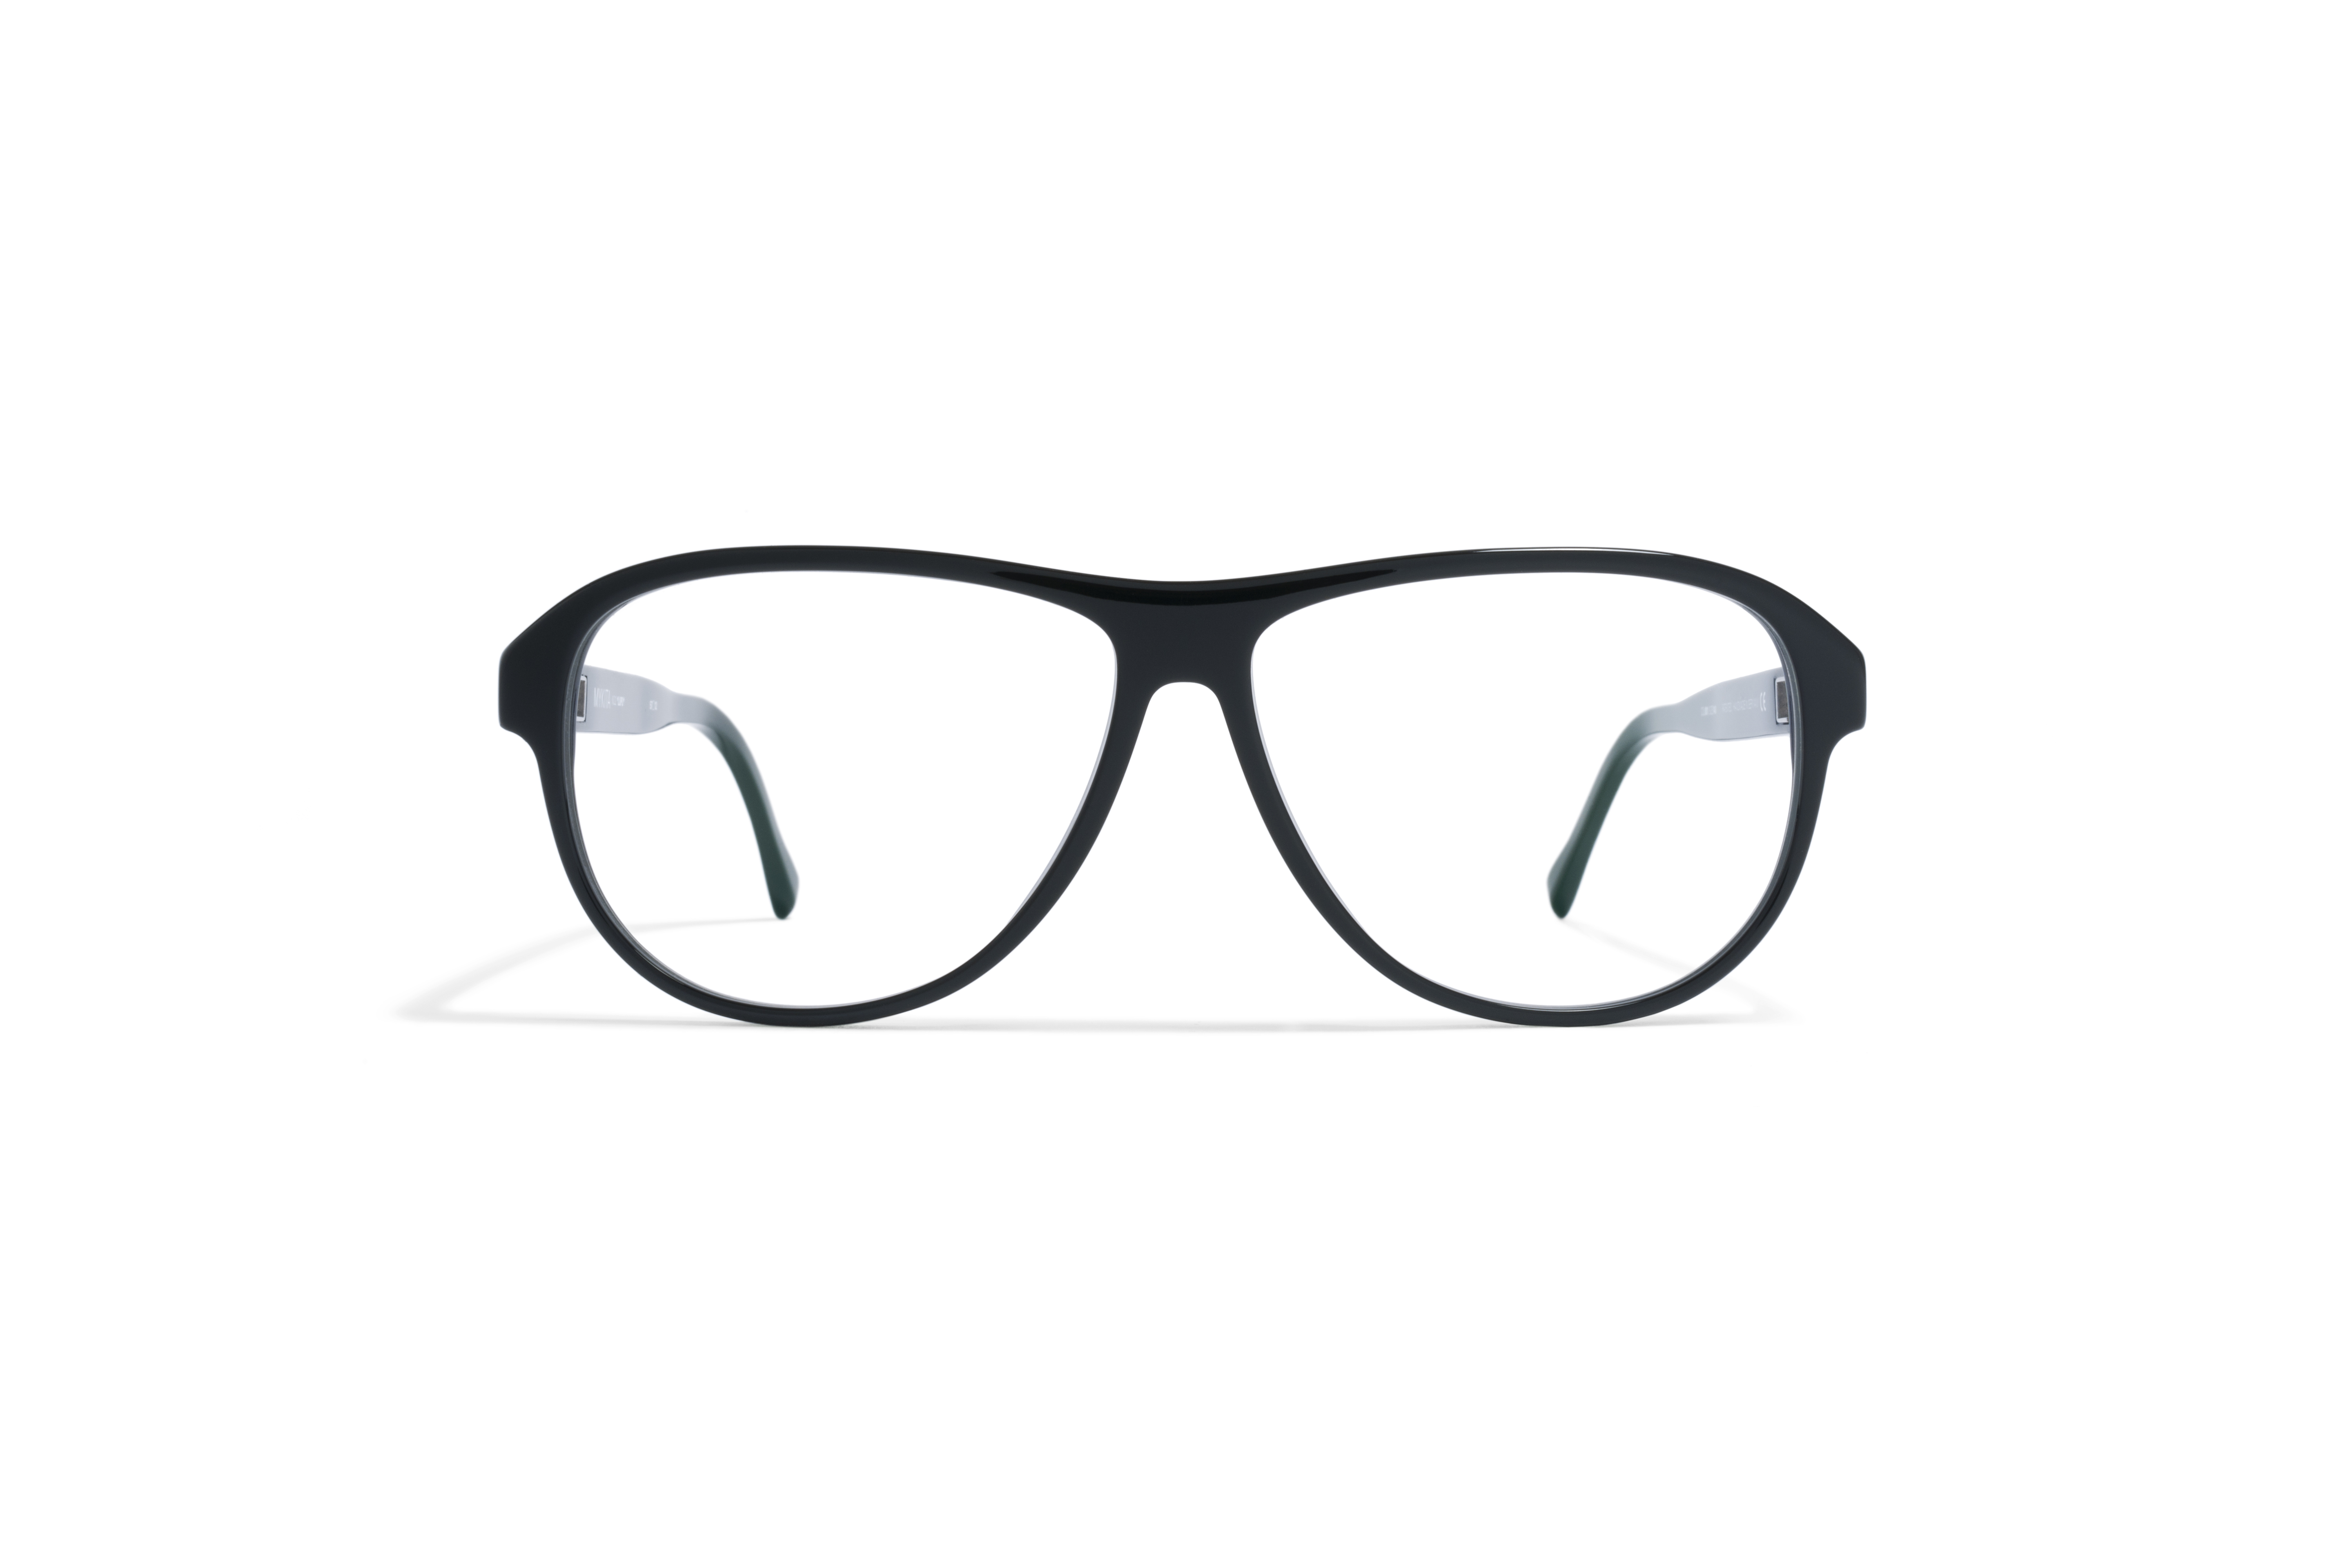 MYKITA - UNFORTUNATELY THIS PRODUCT IS NO LONGER AVAILABLE